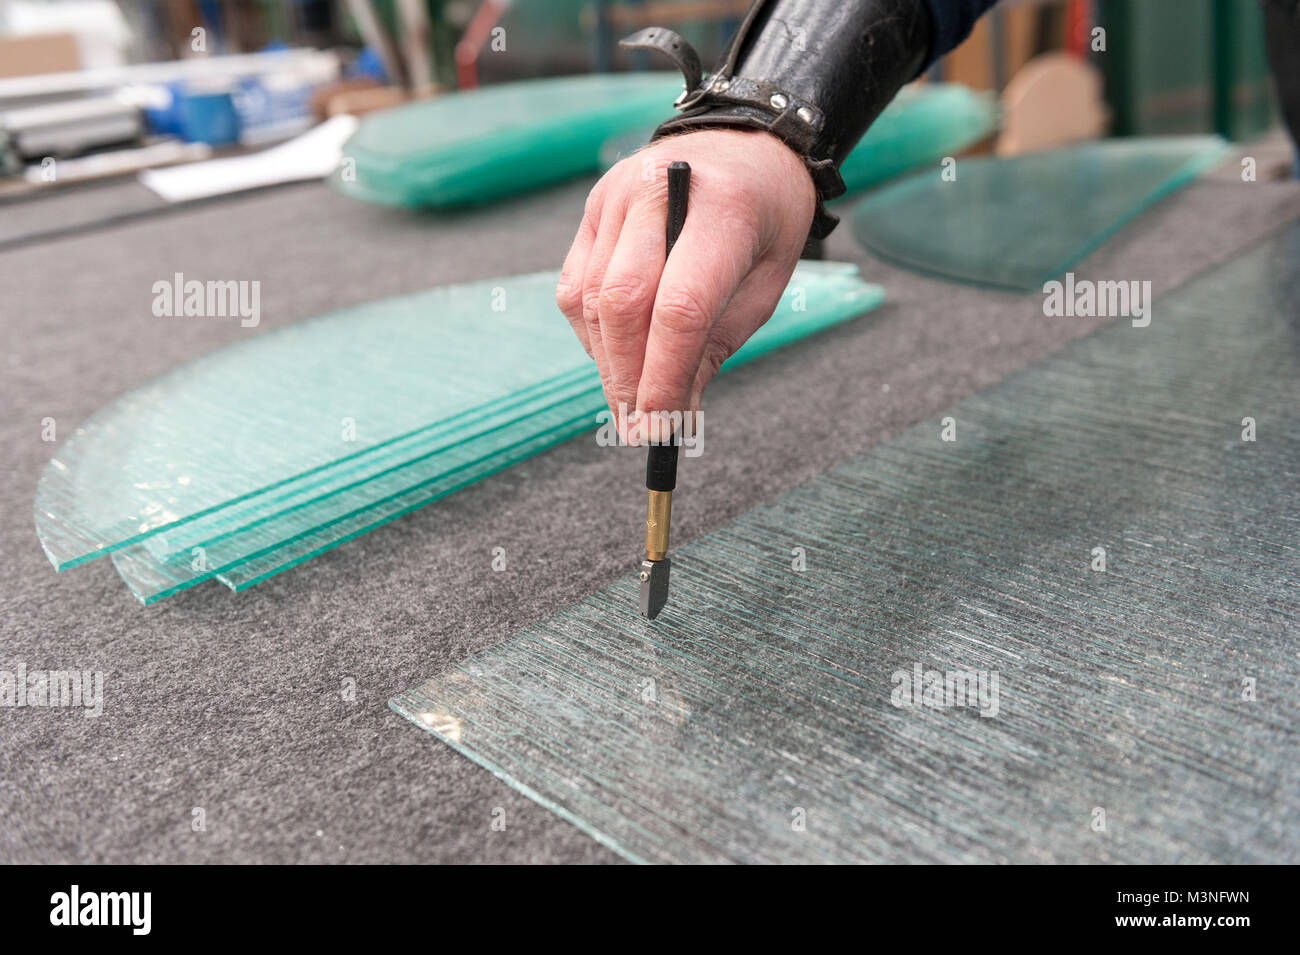 Glass cutting by hand ..A glass cutter tool with diamond blade